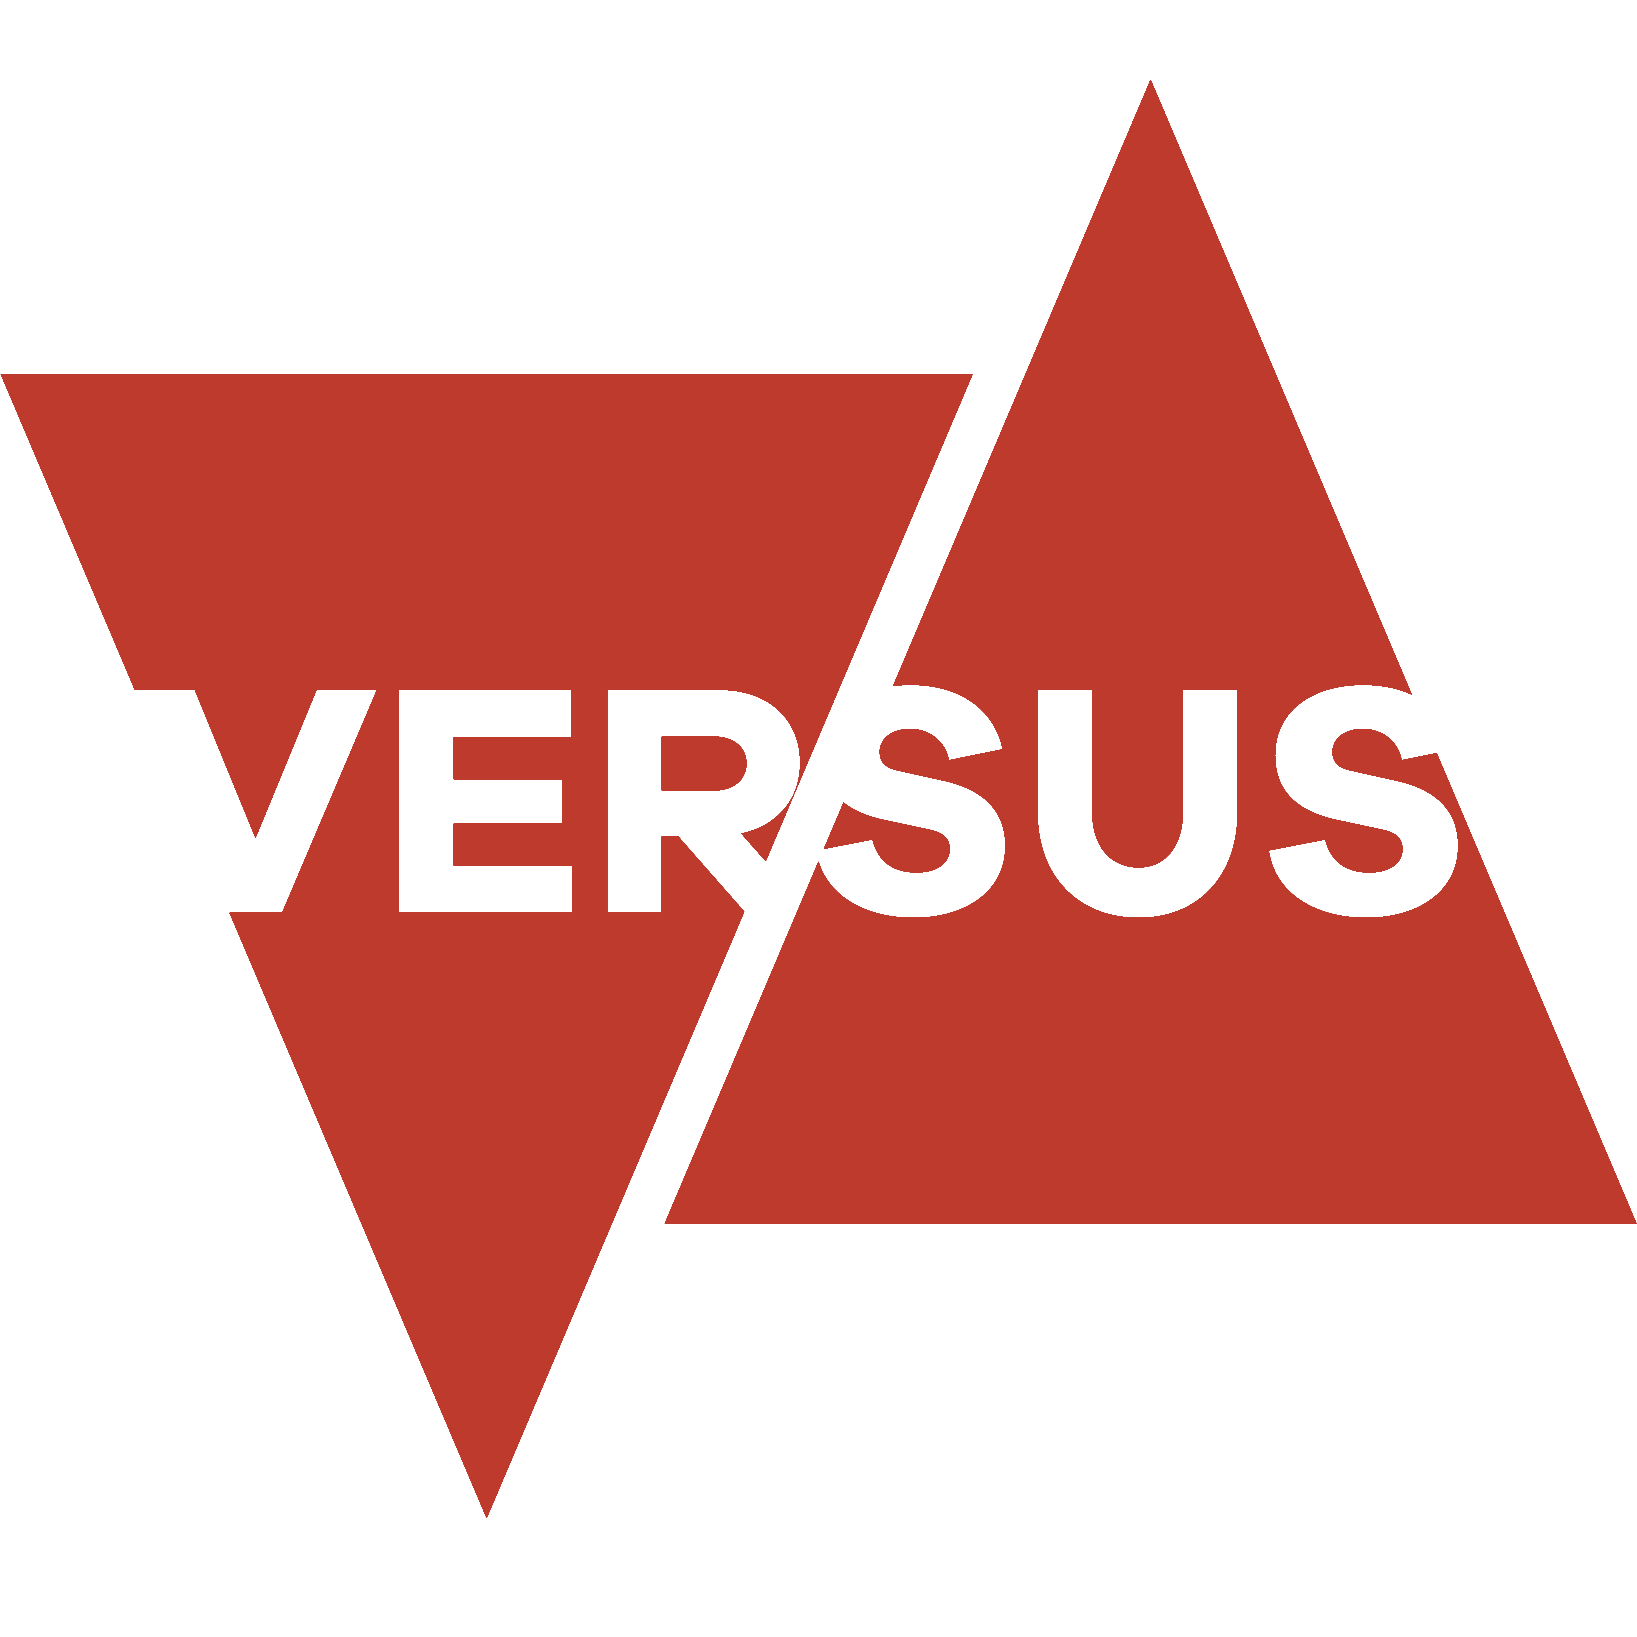 Versus Entertainment, a film production and distribution company